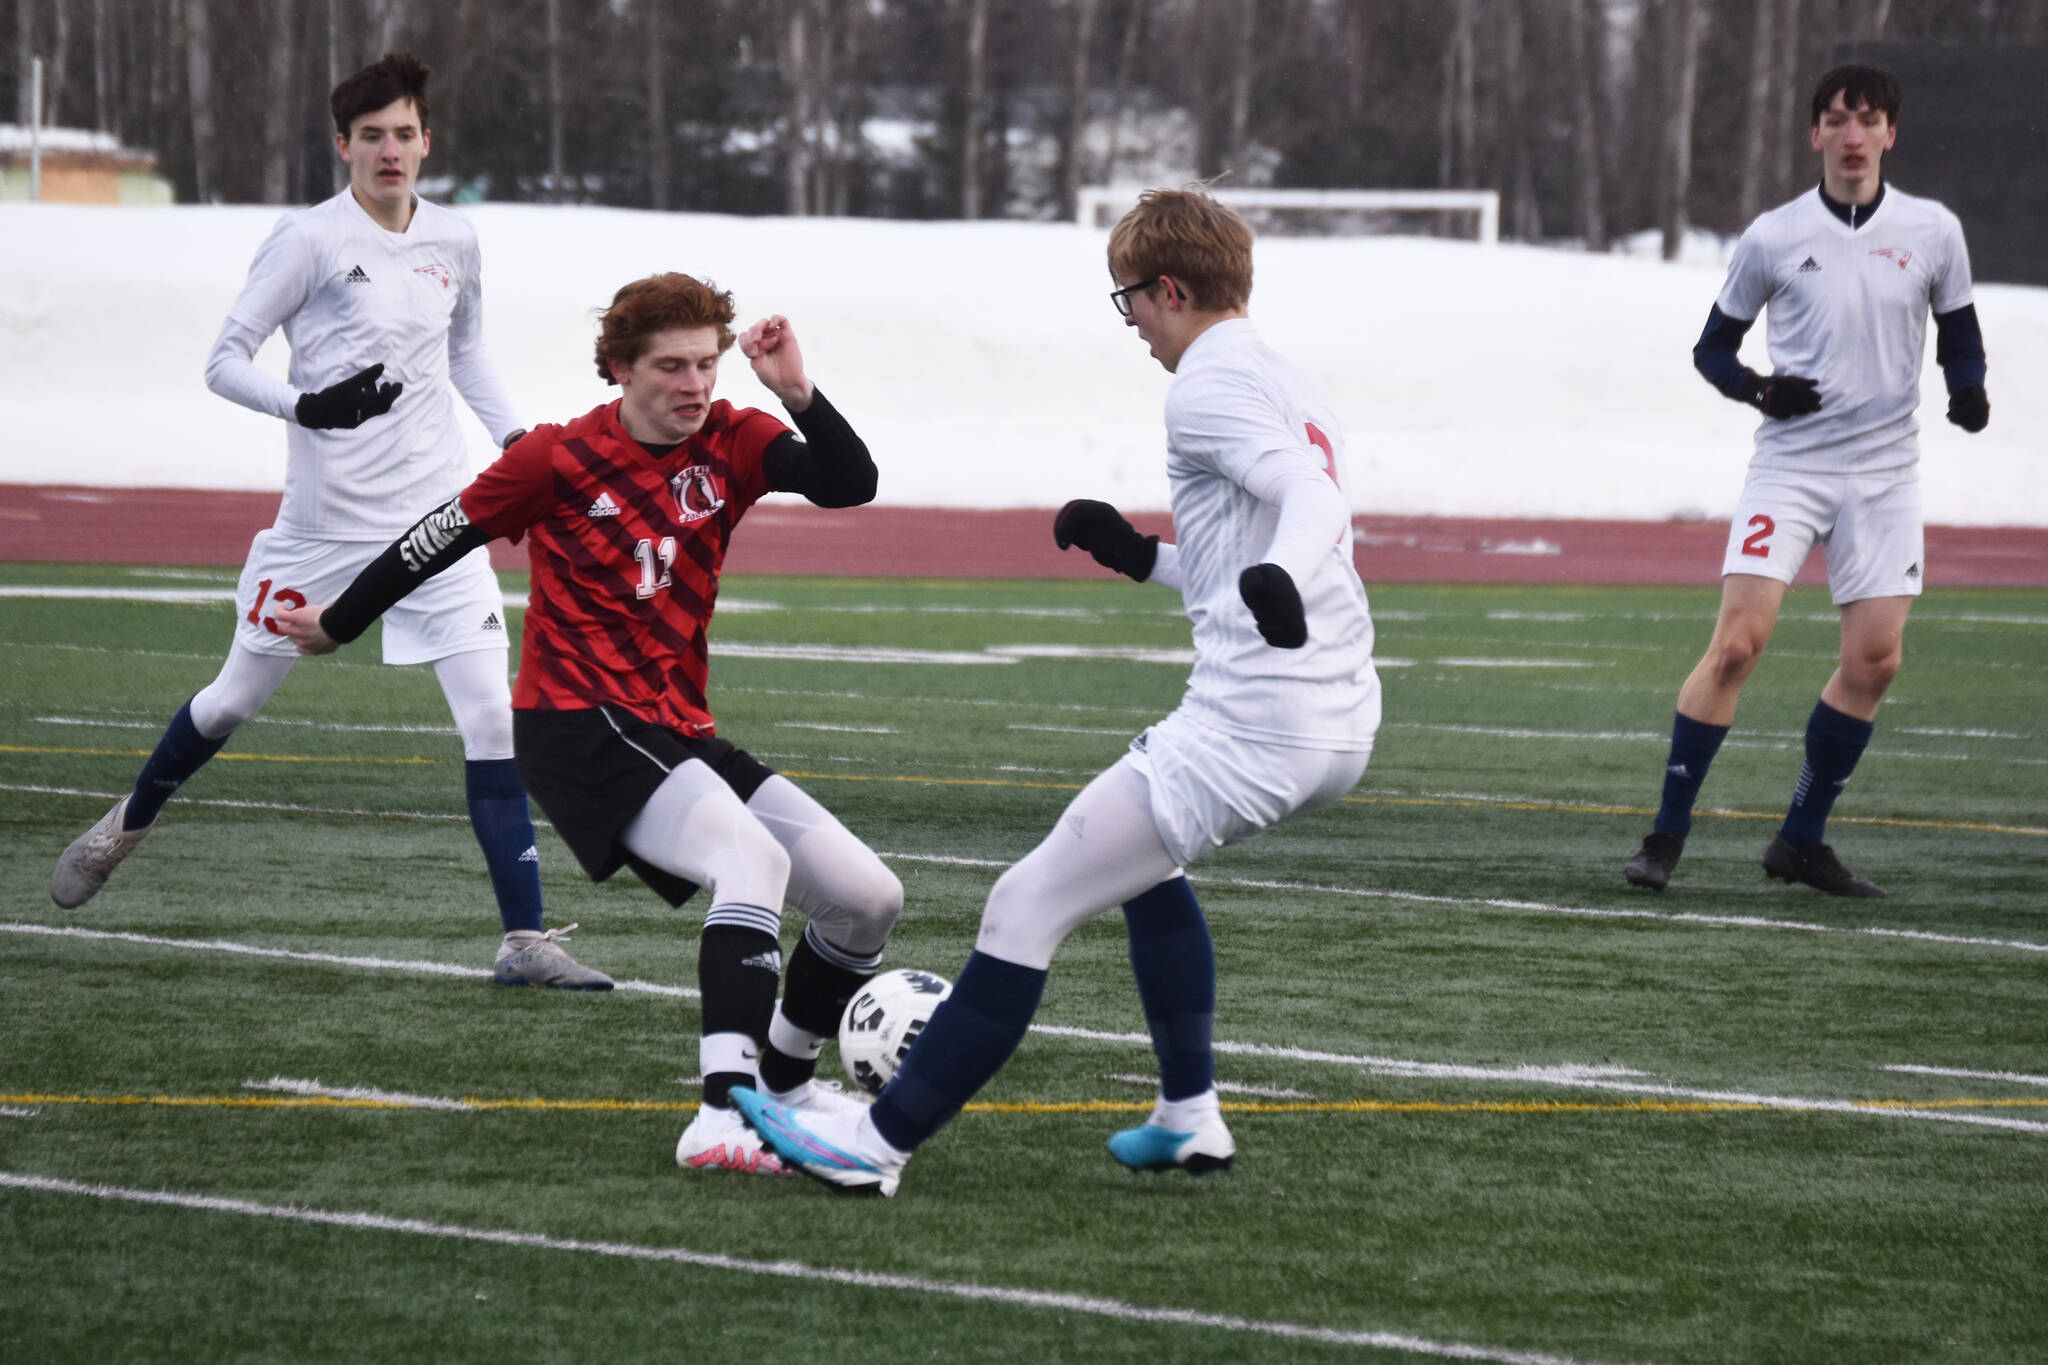 Kenai Central’s Wade James battles for the ball during a soccer game at Ed Hollier Field in Kenai, Alaska, on Thursday, March 30, 2023. (Jake Dye/Peninsula Clarion)